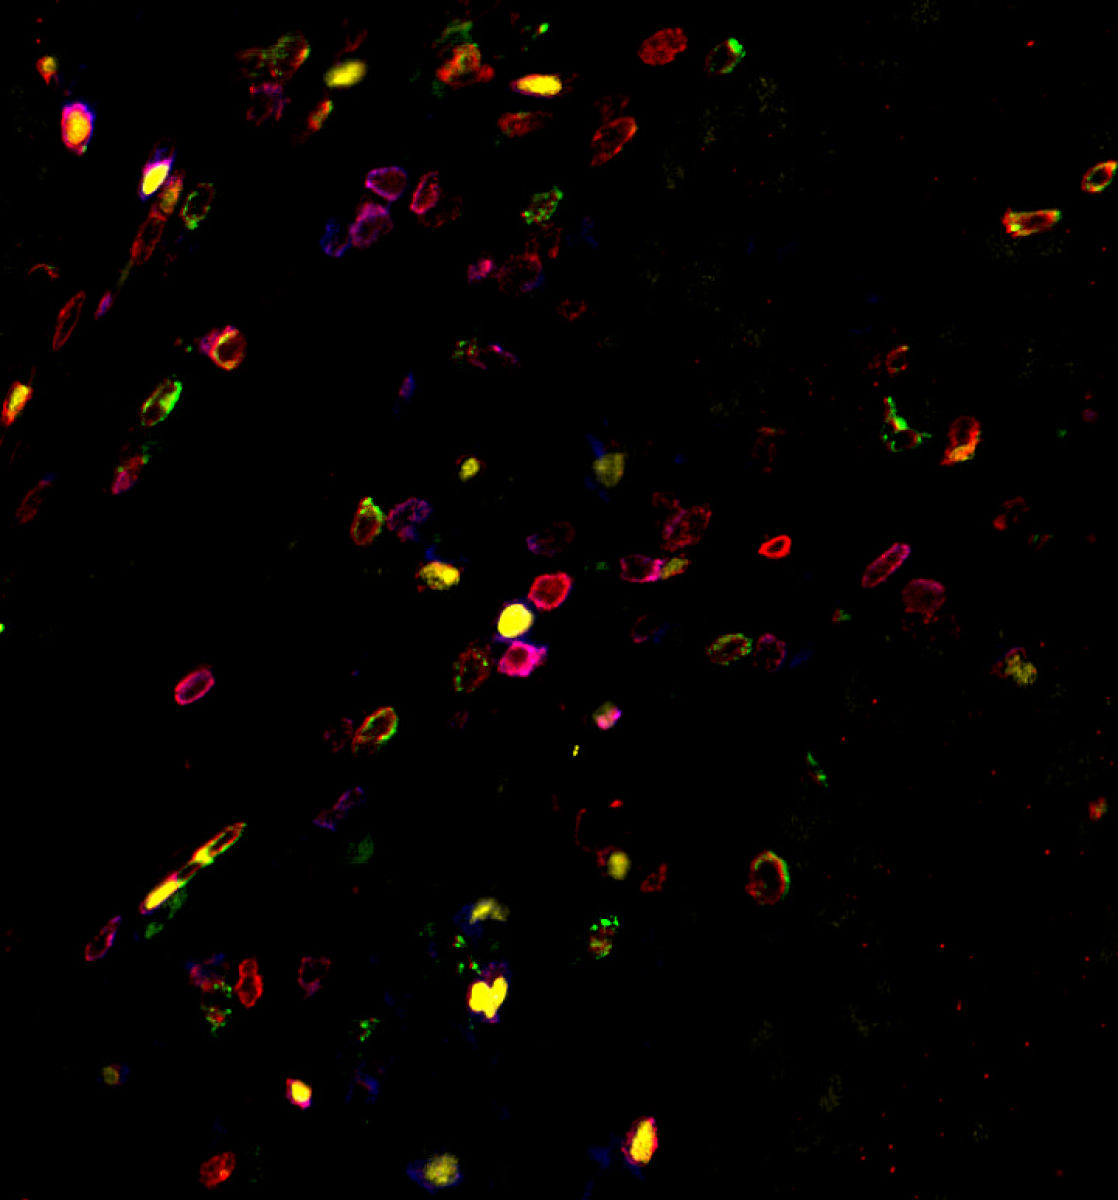 Endometriod adenocarcinoma biopsy - stained manually with HI-6A UltraPlex panel: CD3 (red), FoxP3 (yellow), CD8 (green), CD4 (purple). 20X magnification.